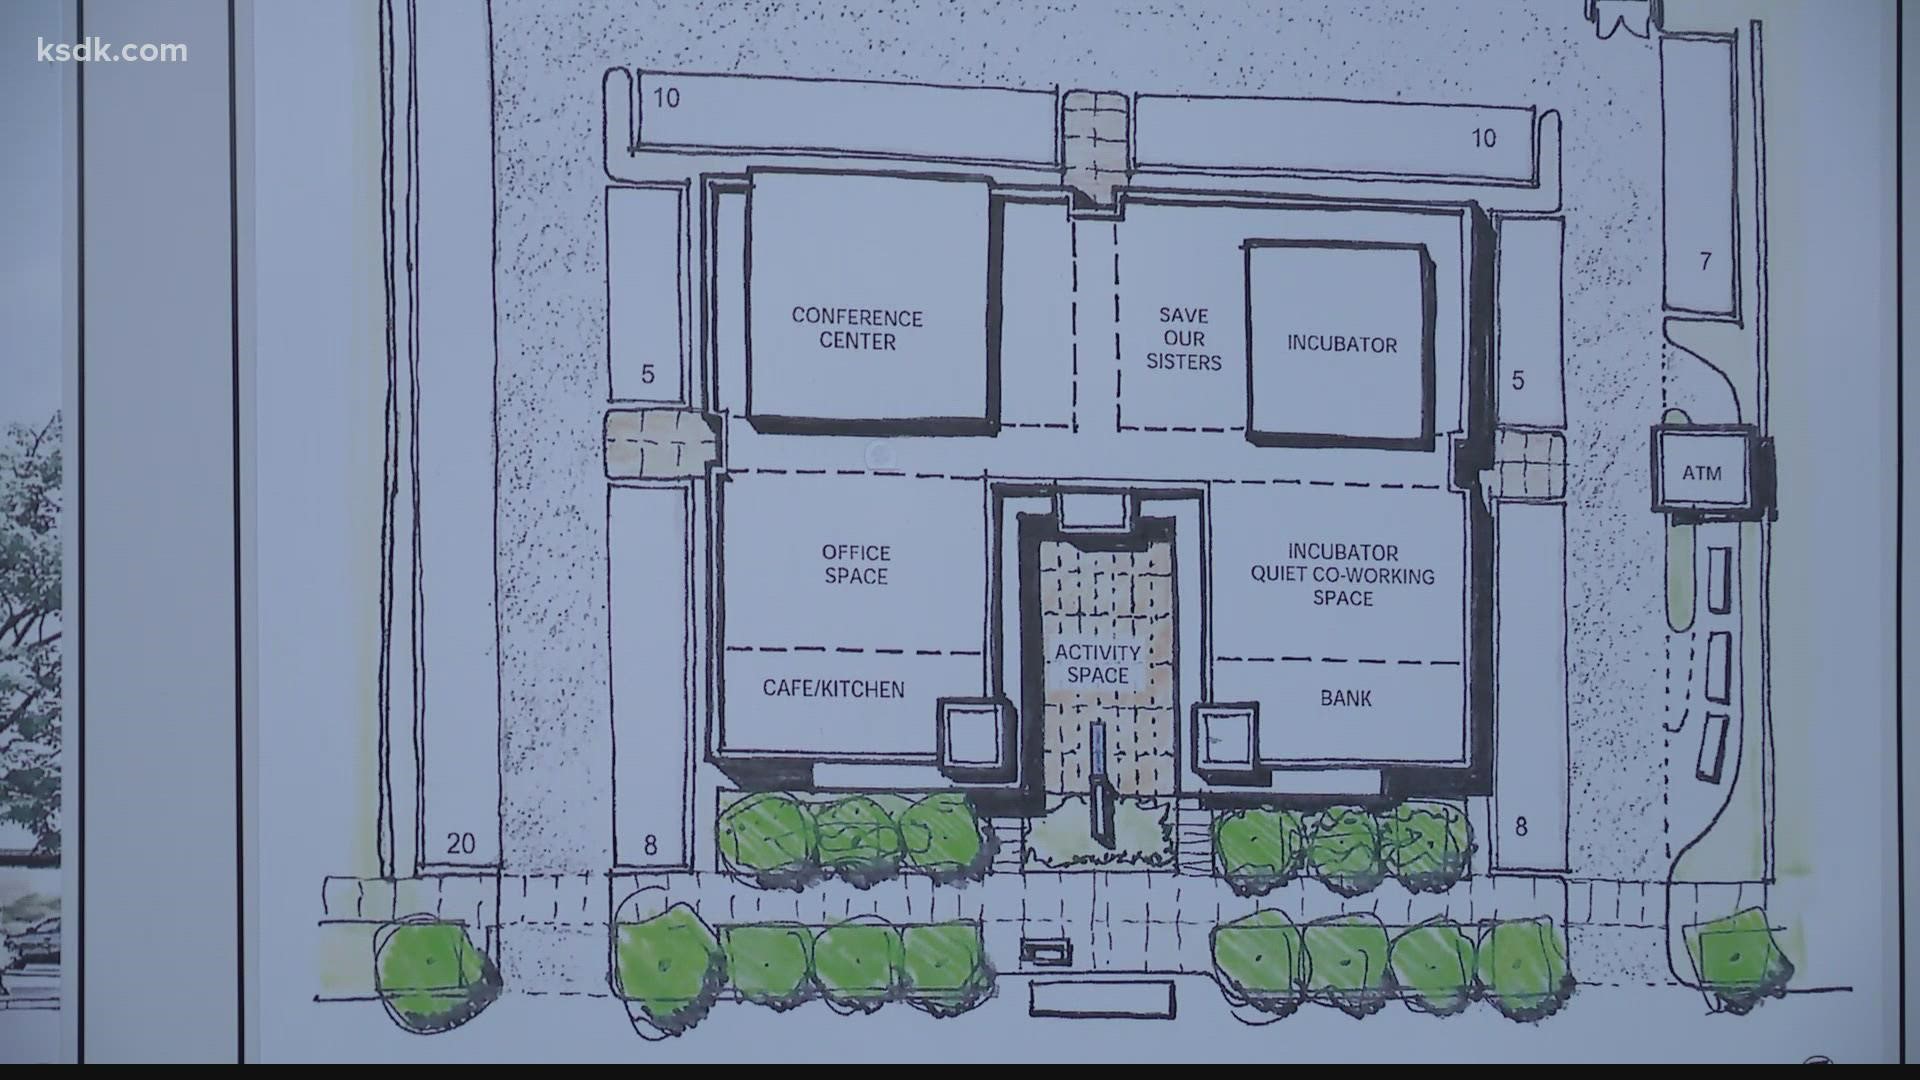 The organization plans to build a center and housing for senior citizens and a city plaza.